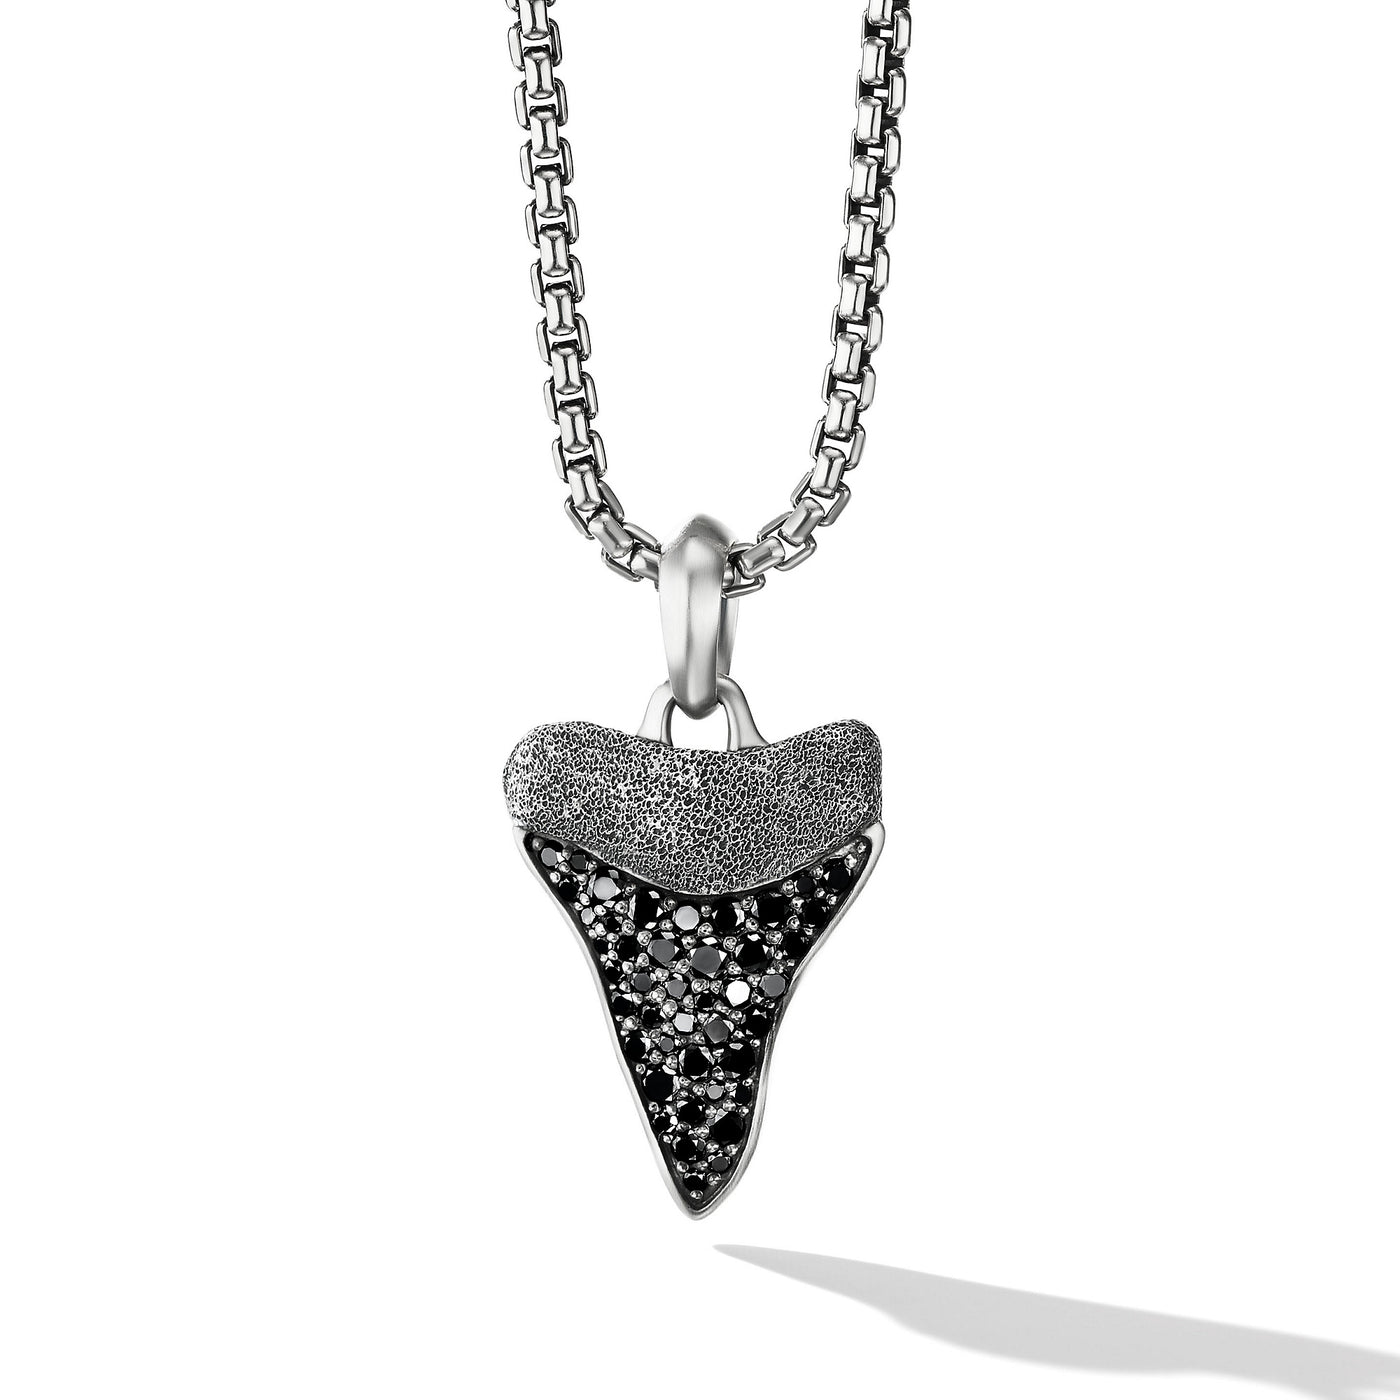 Shark Tooth Amulet in Sterling Silver with Black Diamonds\, 27mm